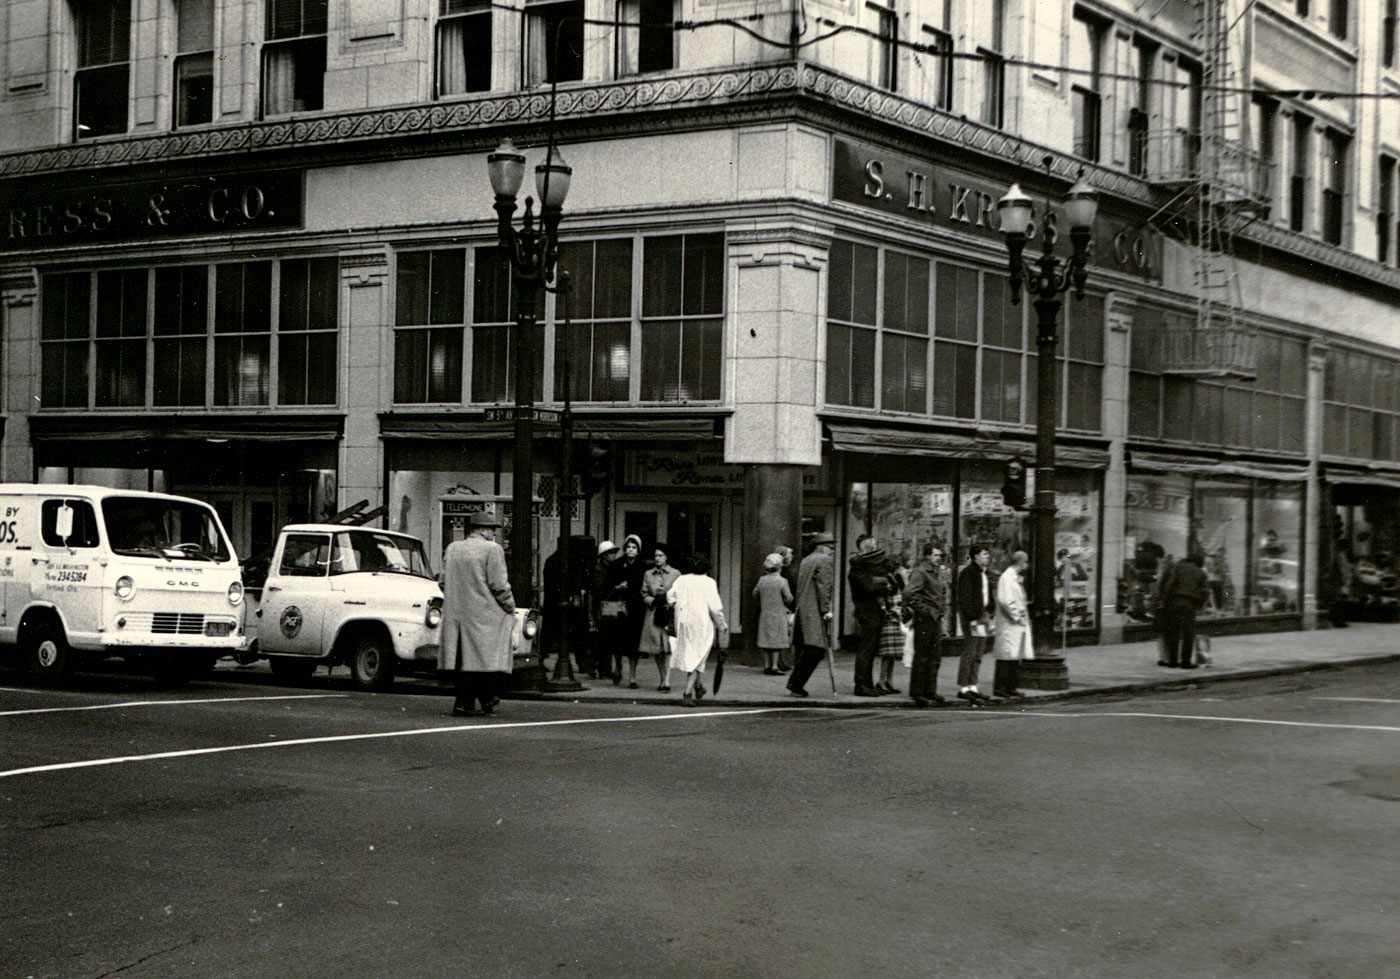 Taken in downtown Portland, OR, in mid 1960s. The Kress's on the corner is now a Williams-Sonoma. View full size.